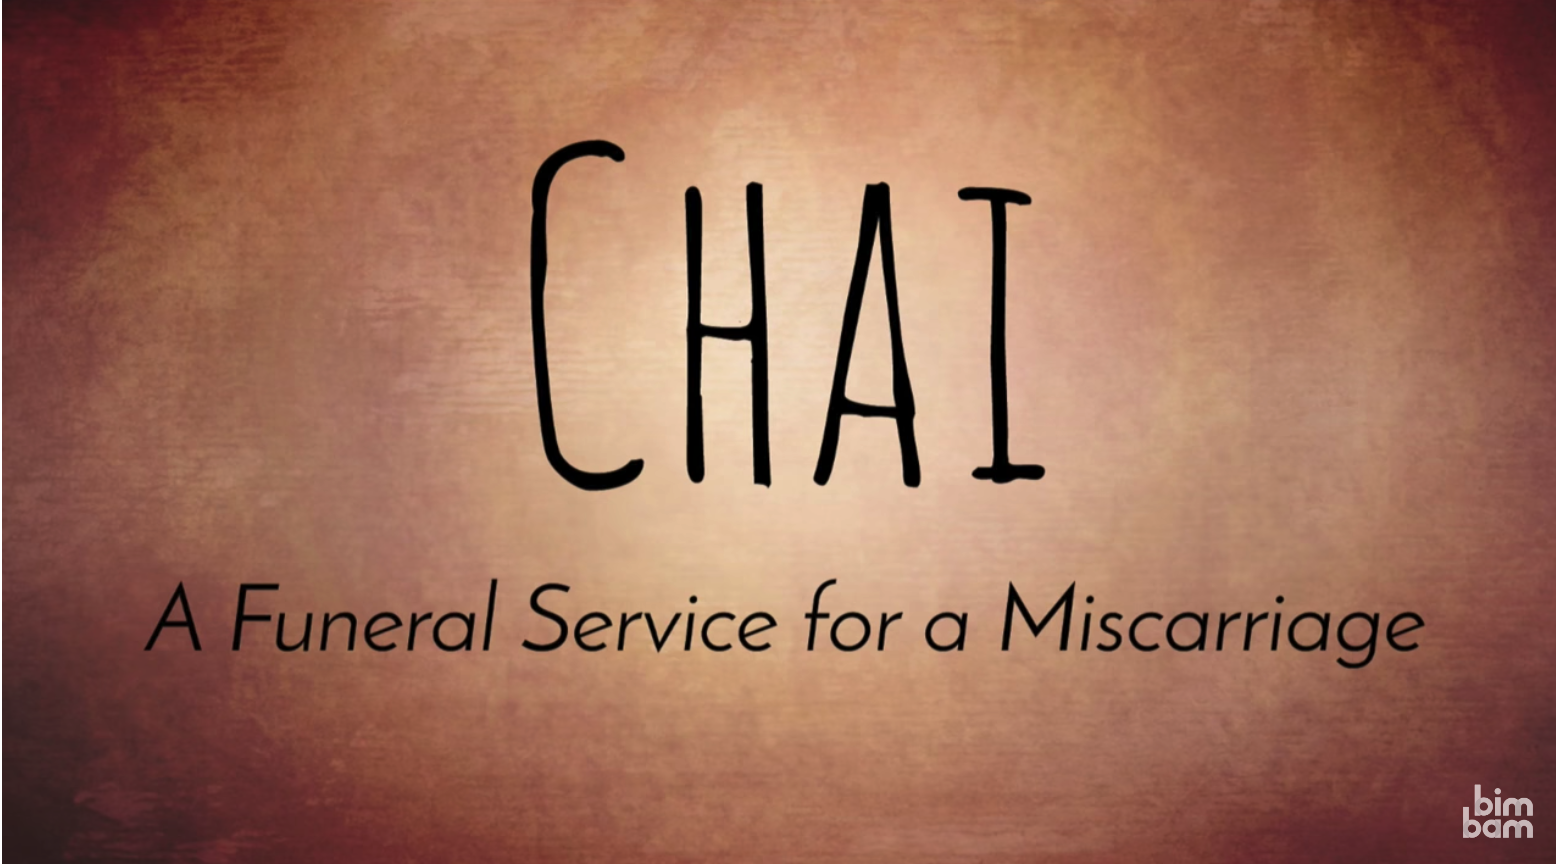 screenshot from video, chai: funeral service for a miscarriage